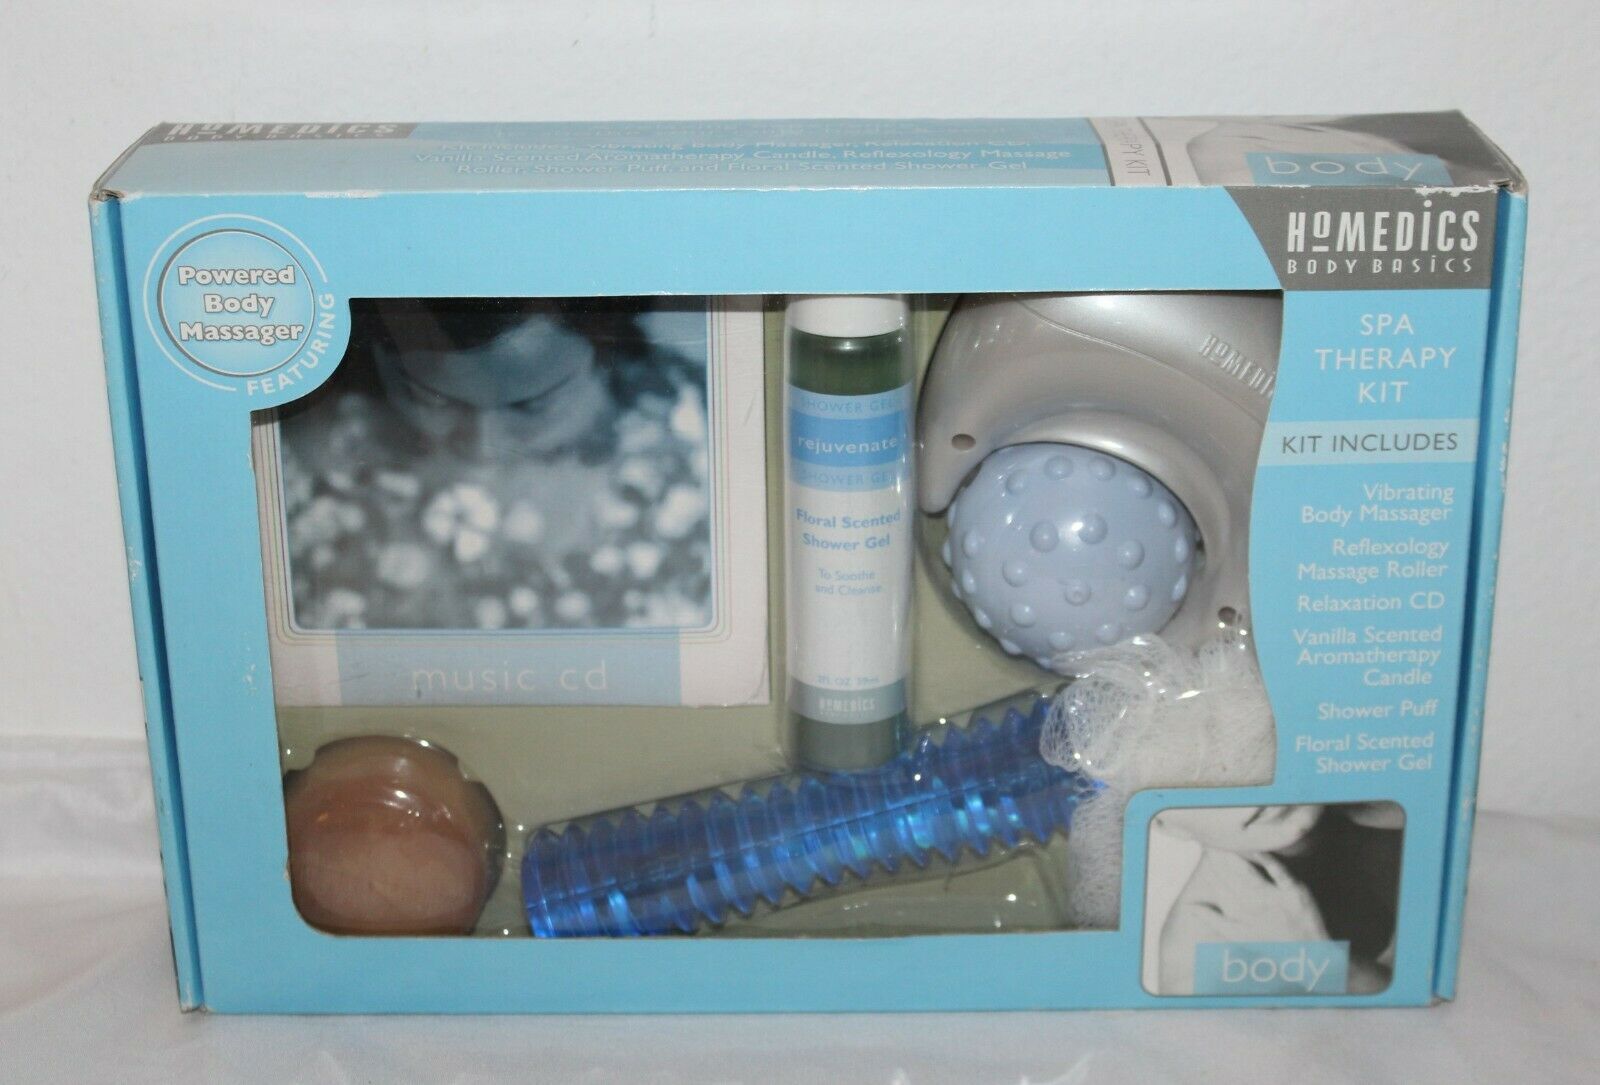 Primary image for Homedics NEW Body Basics 6 Pc Spa Therapy Kit Featuring Powered Body Massager 